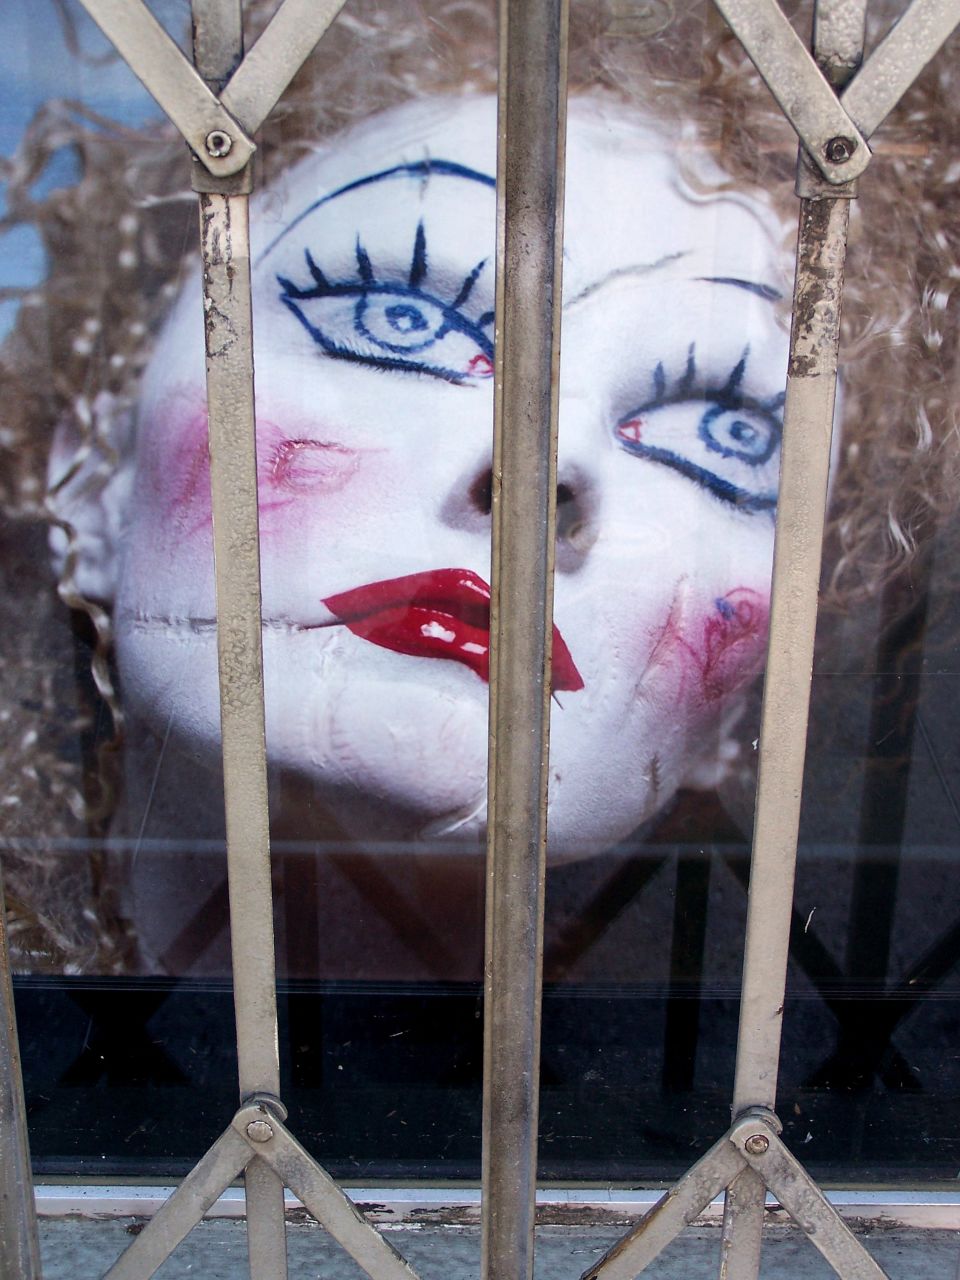 a doll is dressed as a creepy woman looking through the bars